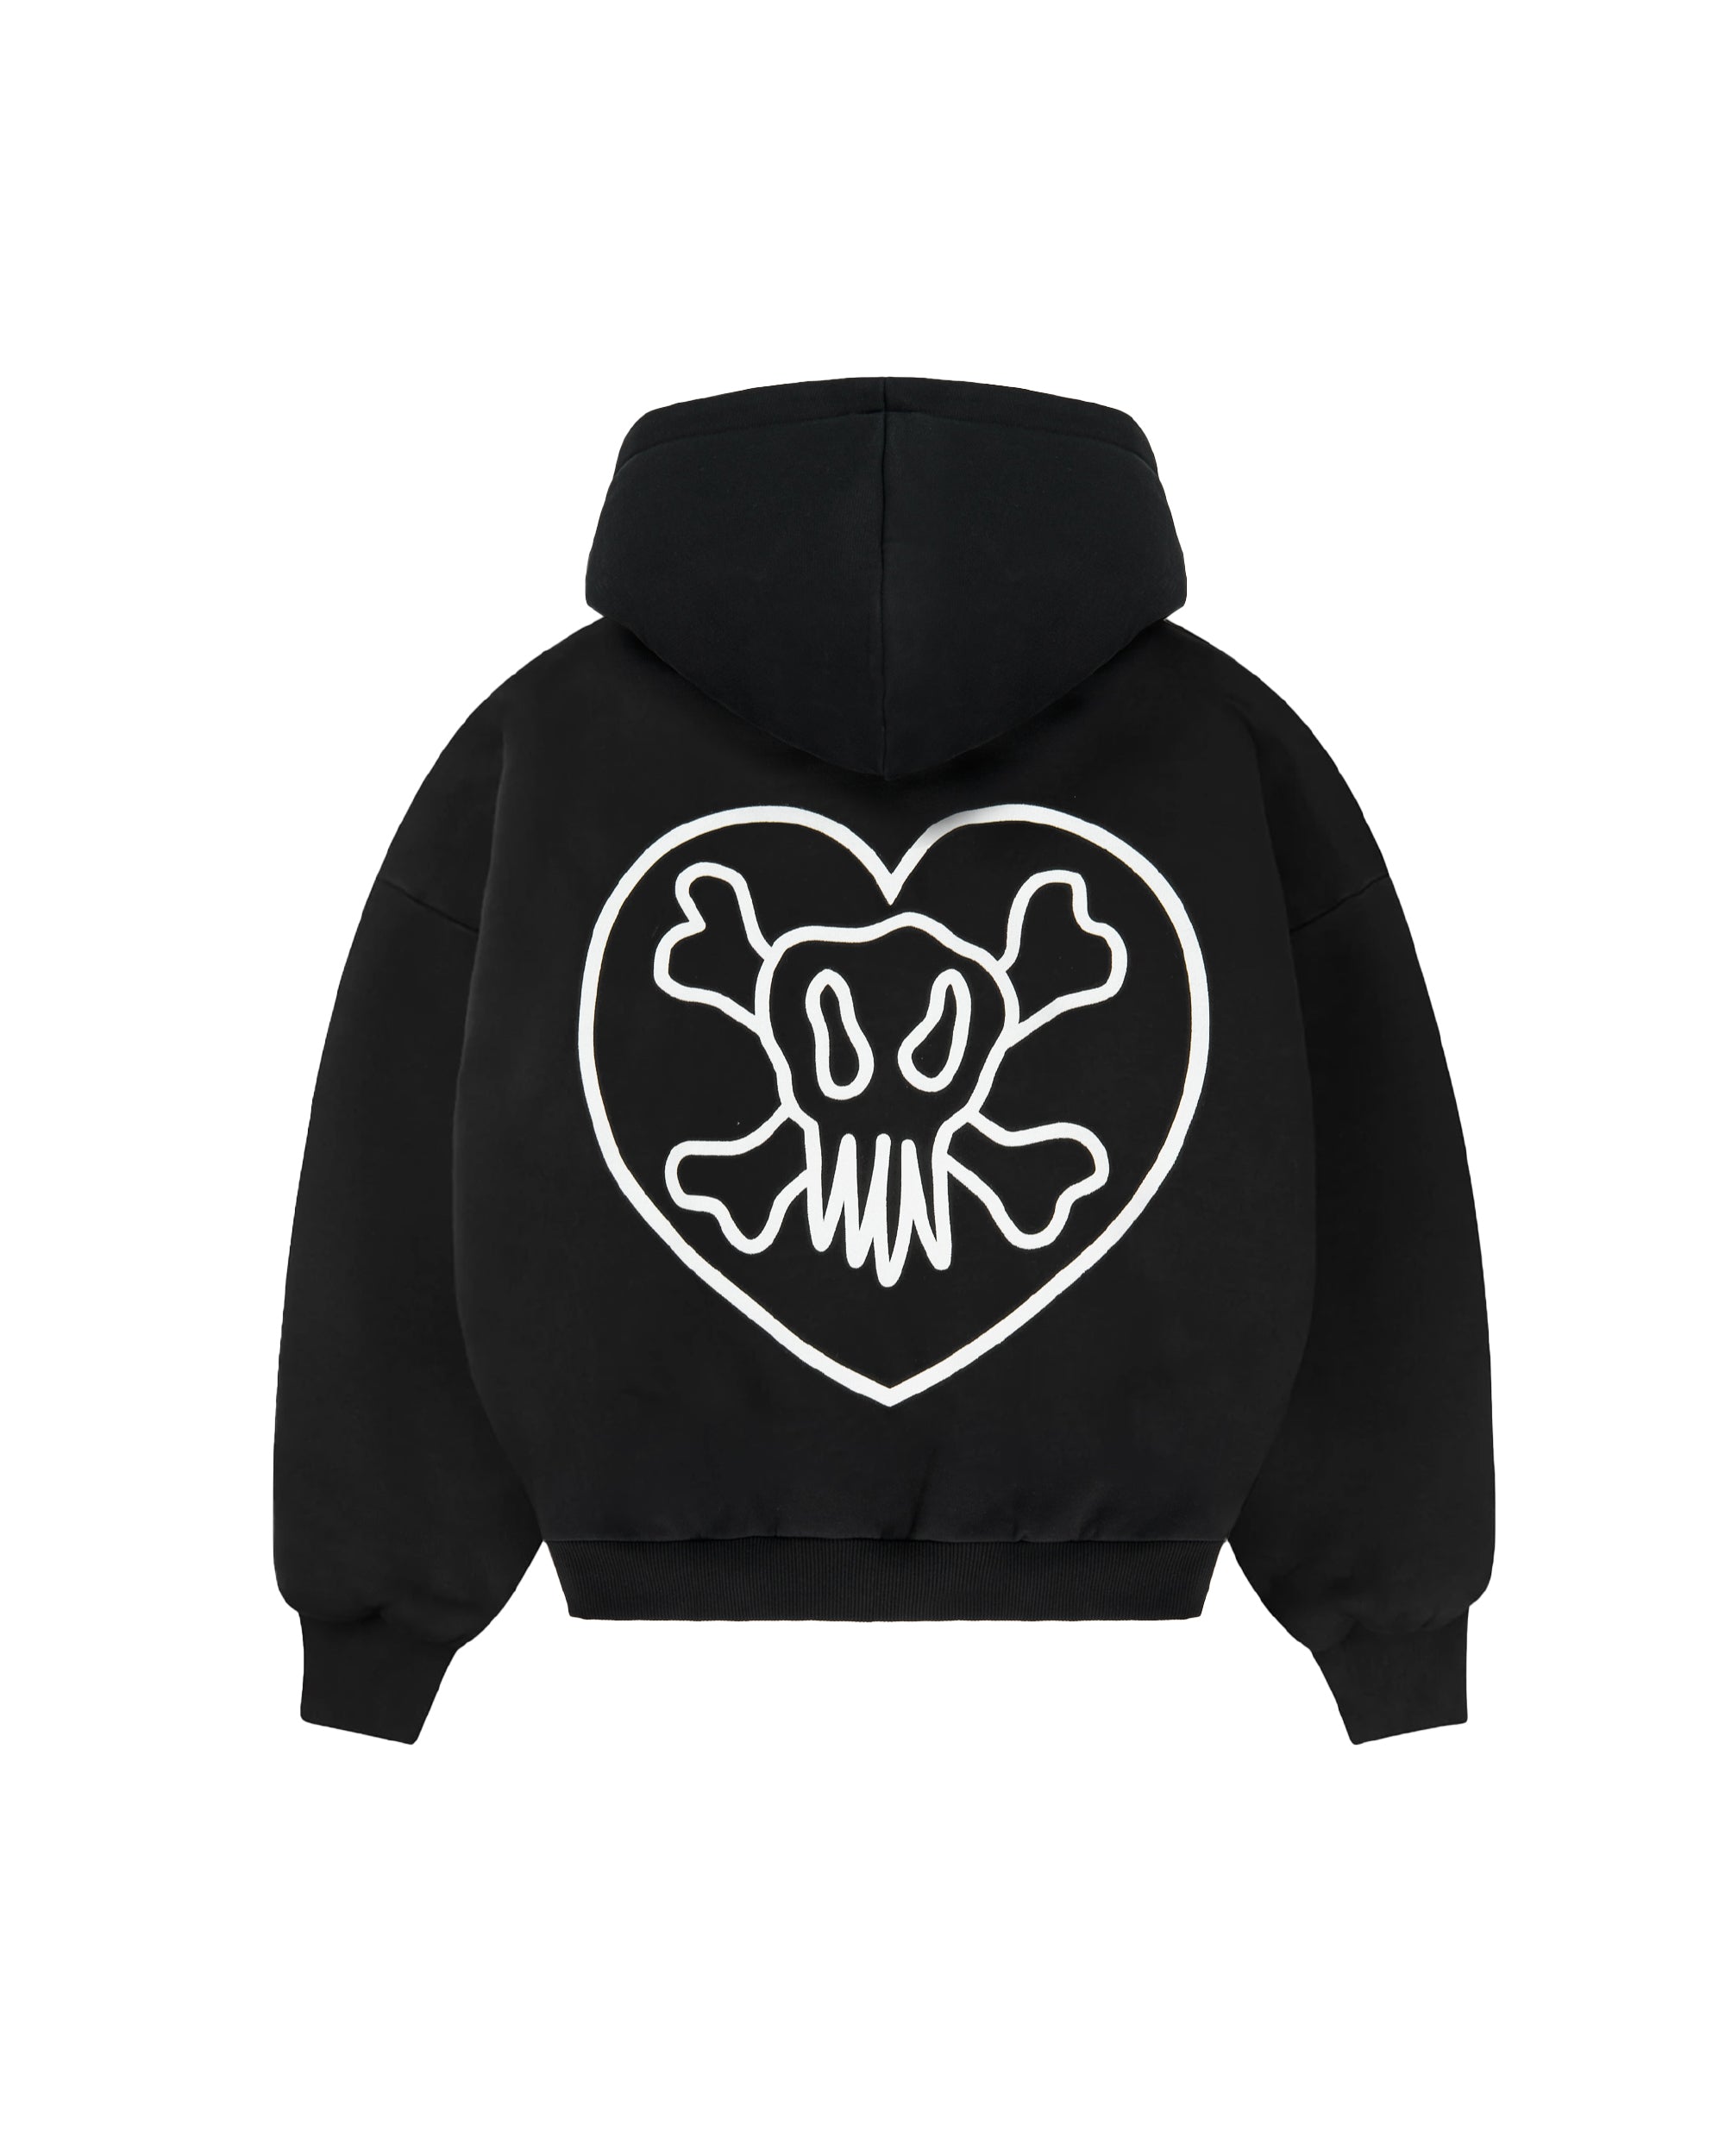 6ixt4our - SKULL AND HEART HOODIE